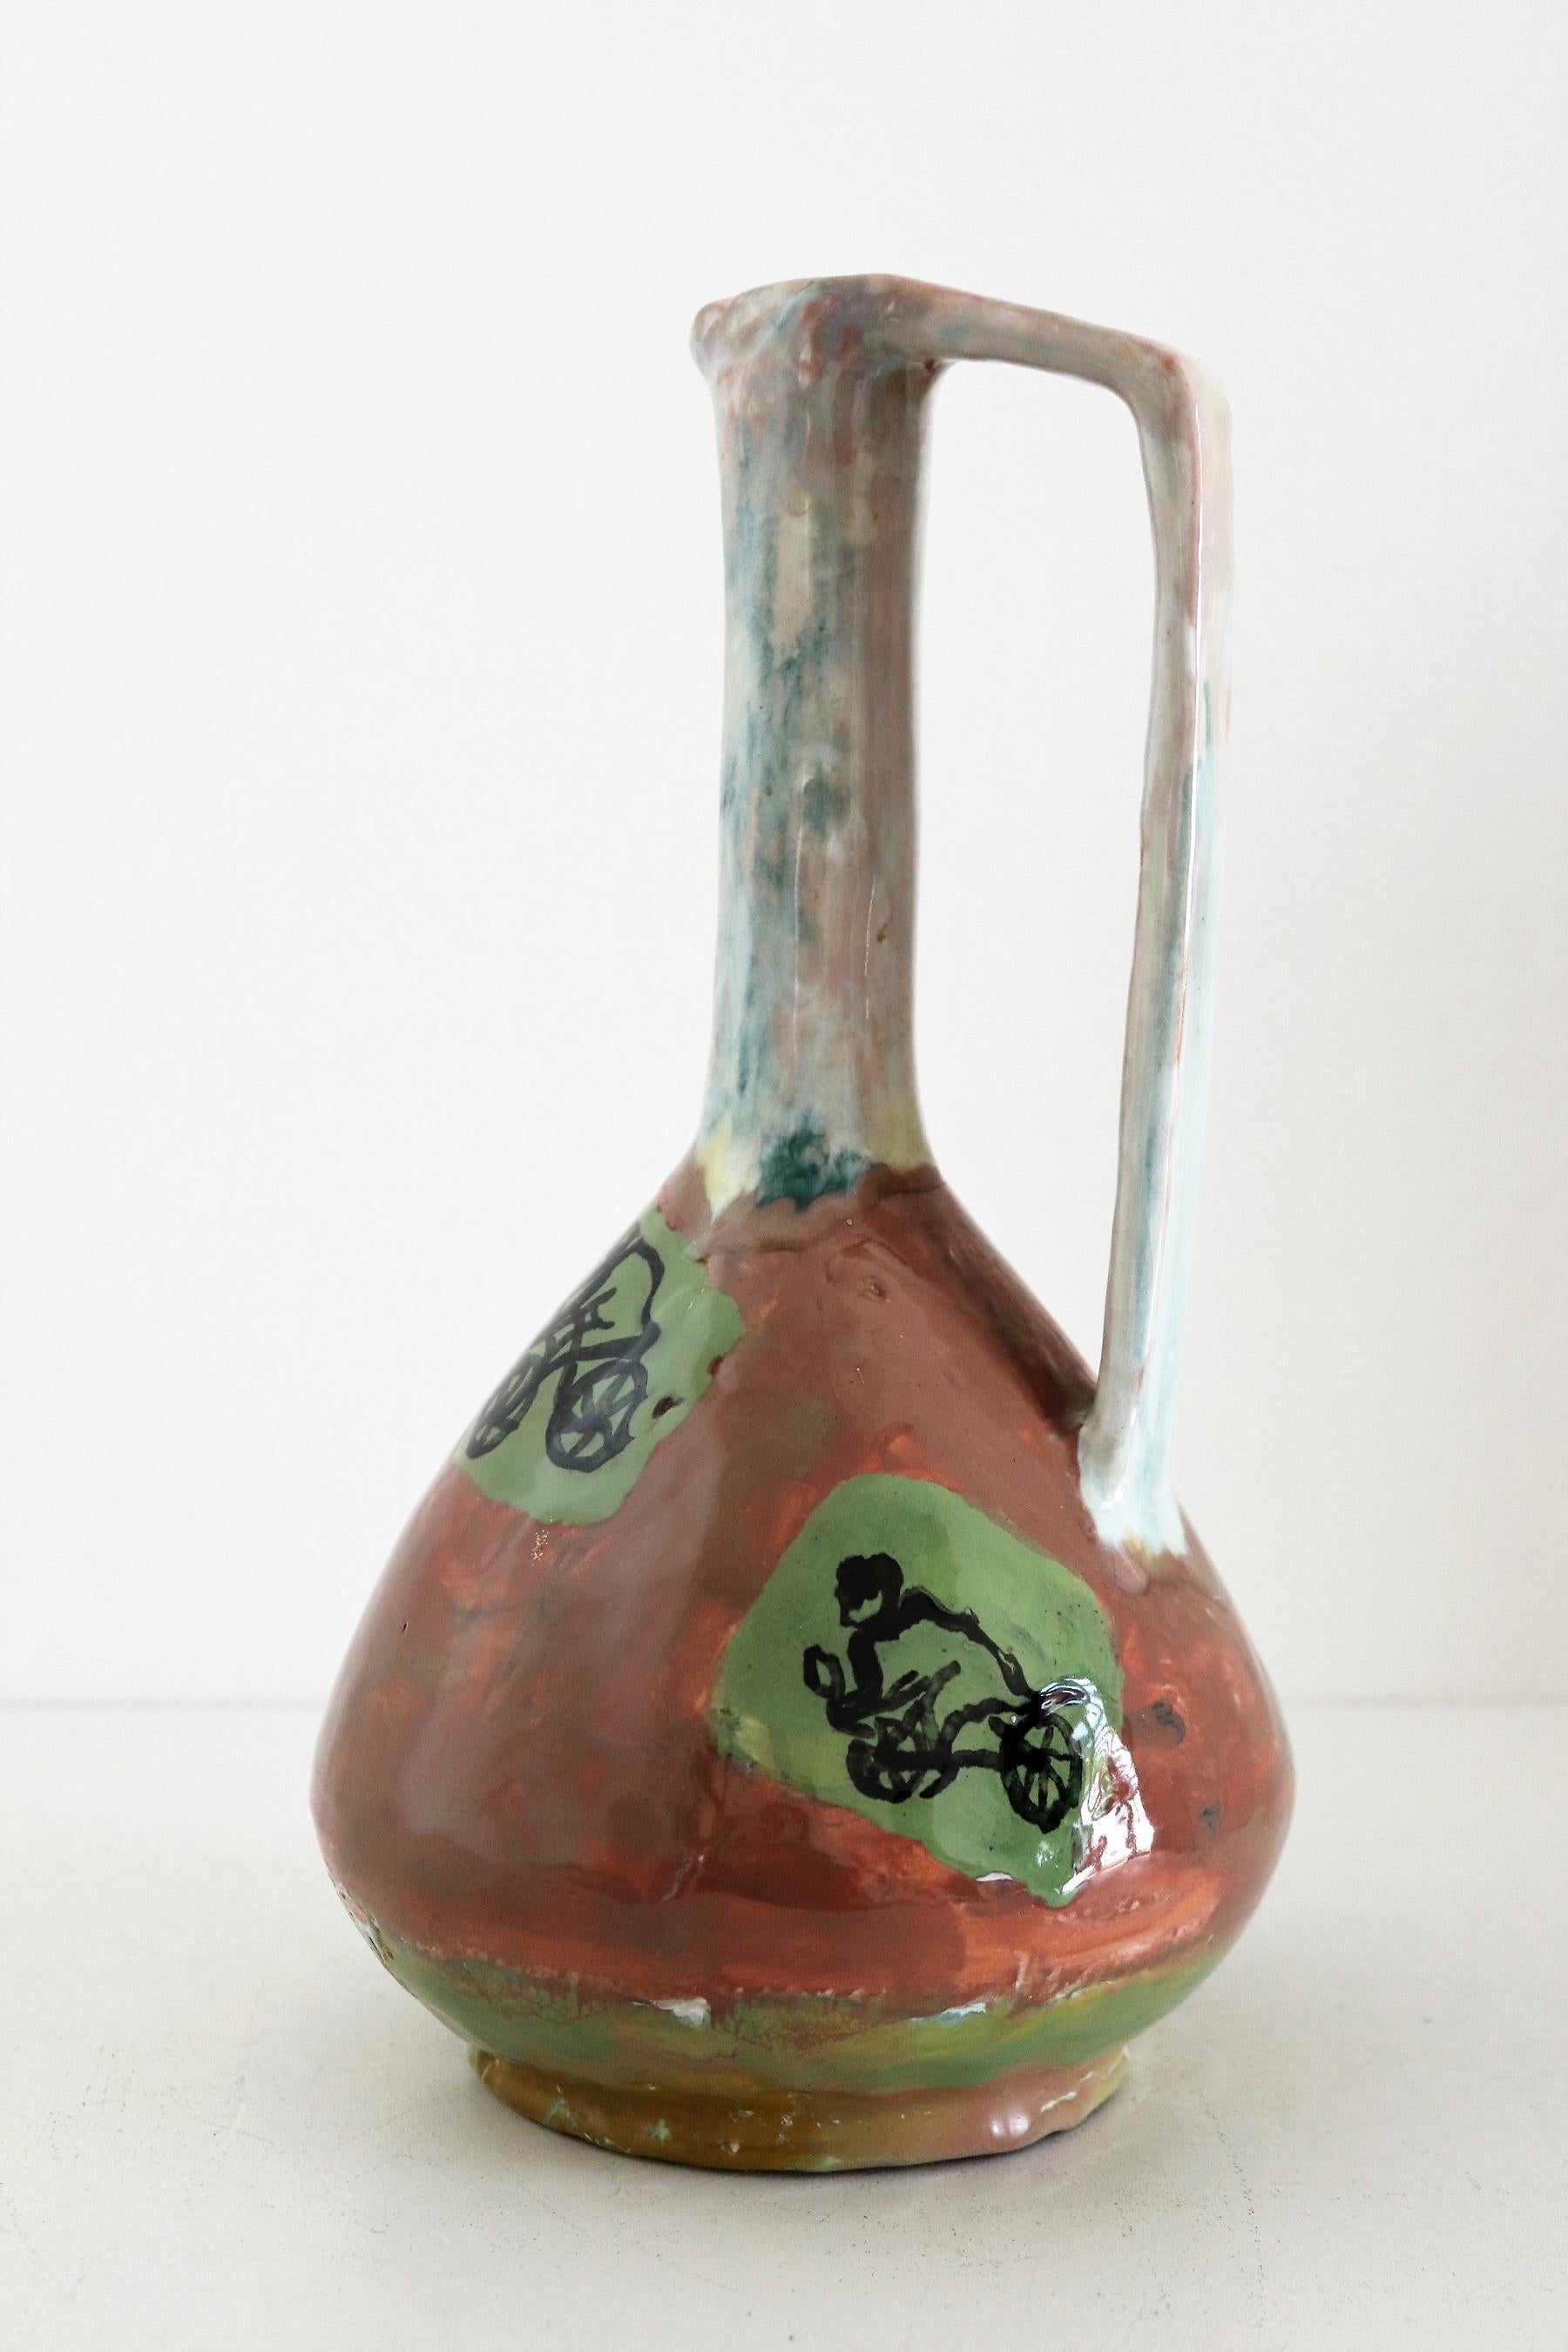 Gorgeous and rare, unique ceramic vase hand painted and signed with N.D.R. by artist from Italian ceramic studio Orobico Arte Artigianato (ART RUMI) in the 1950s.
The vase is made of ceramic like red clay and hand painted with several naive